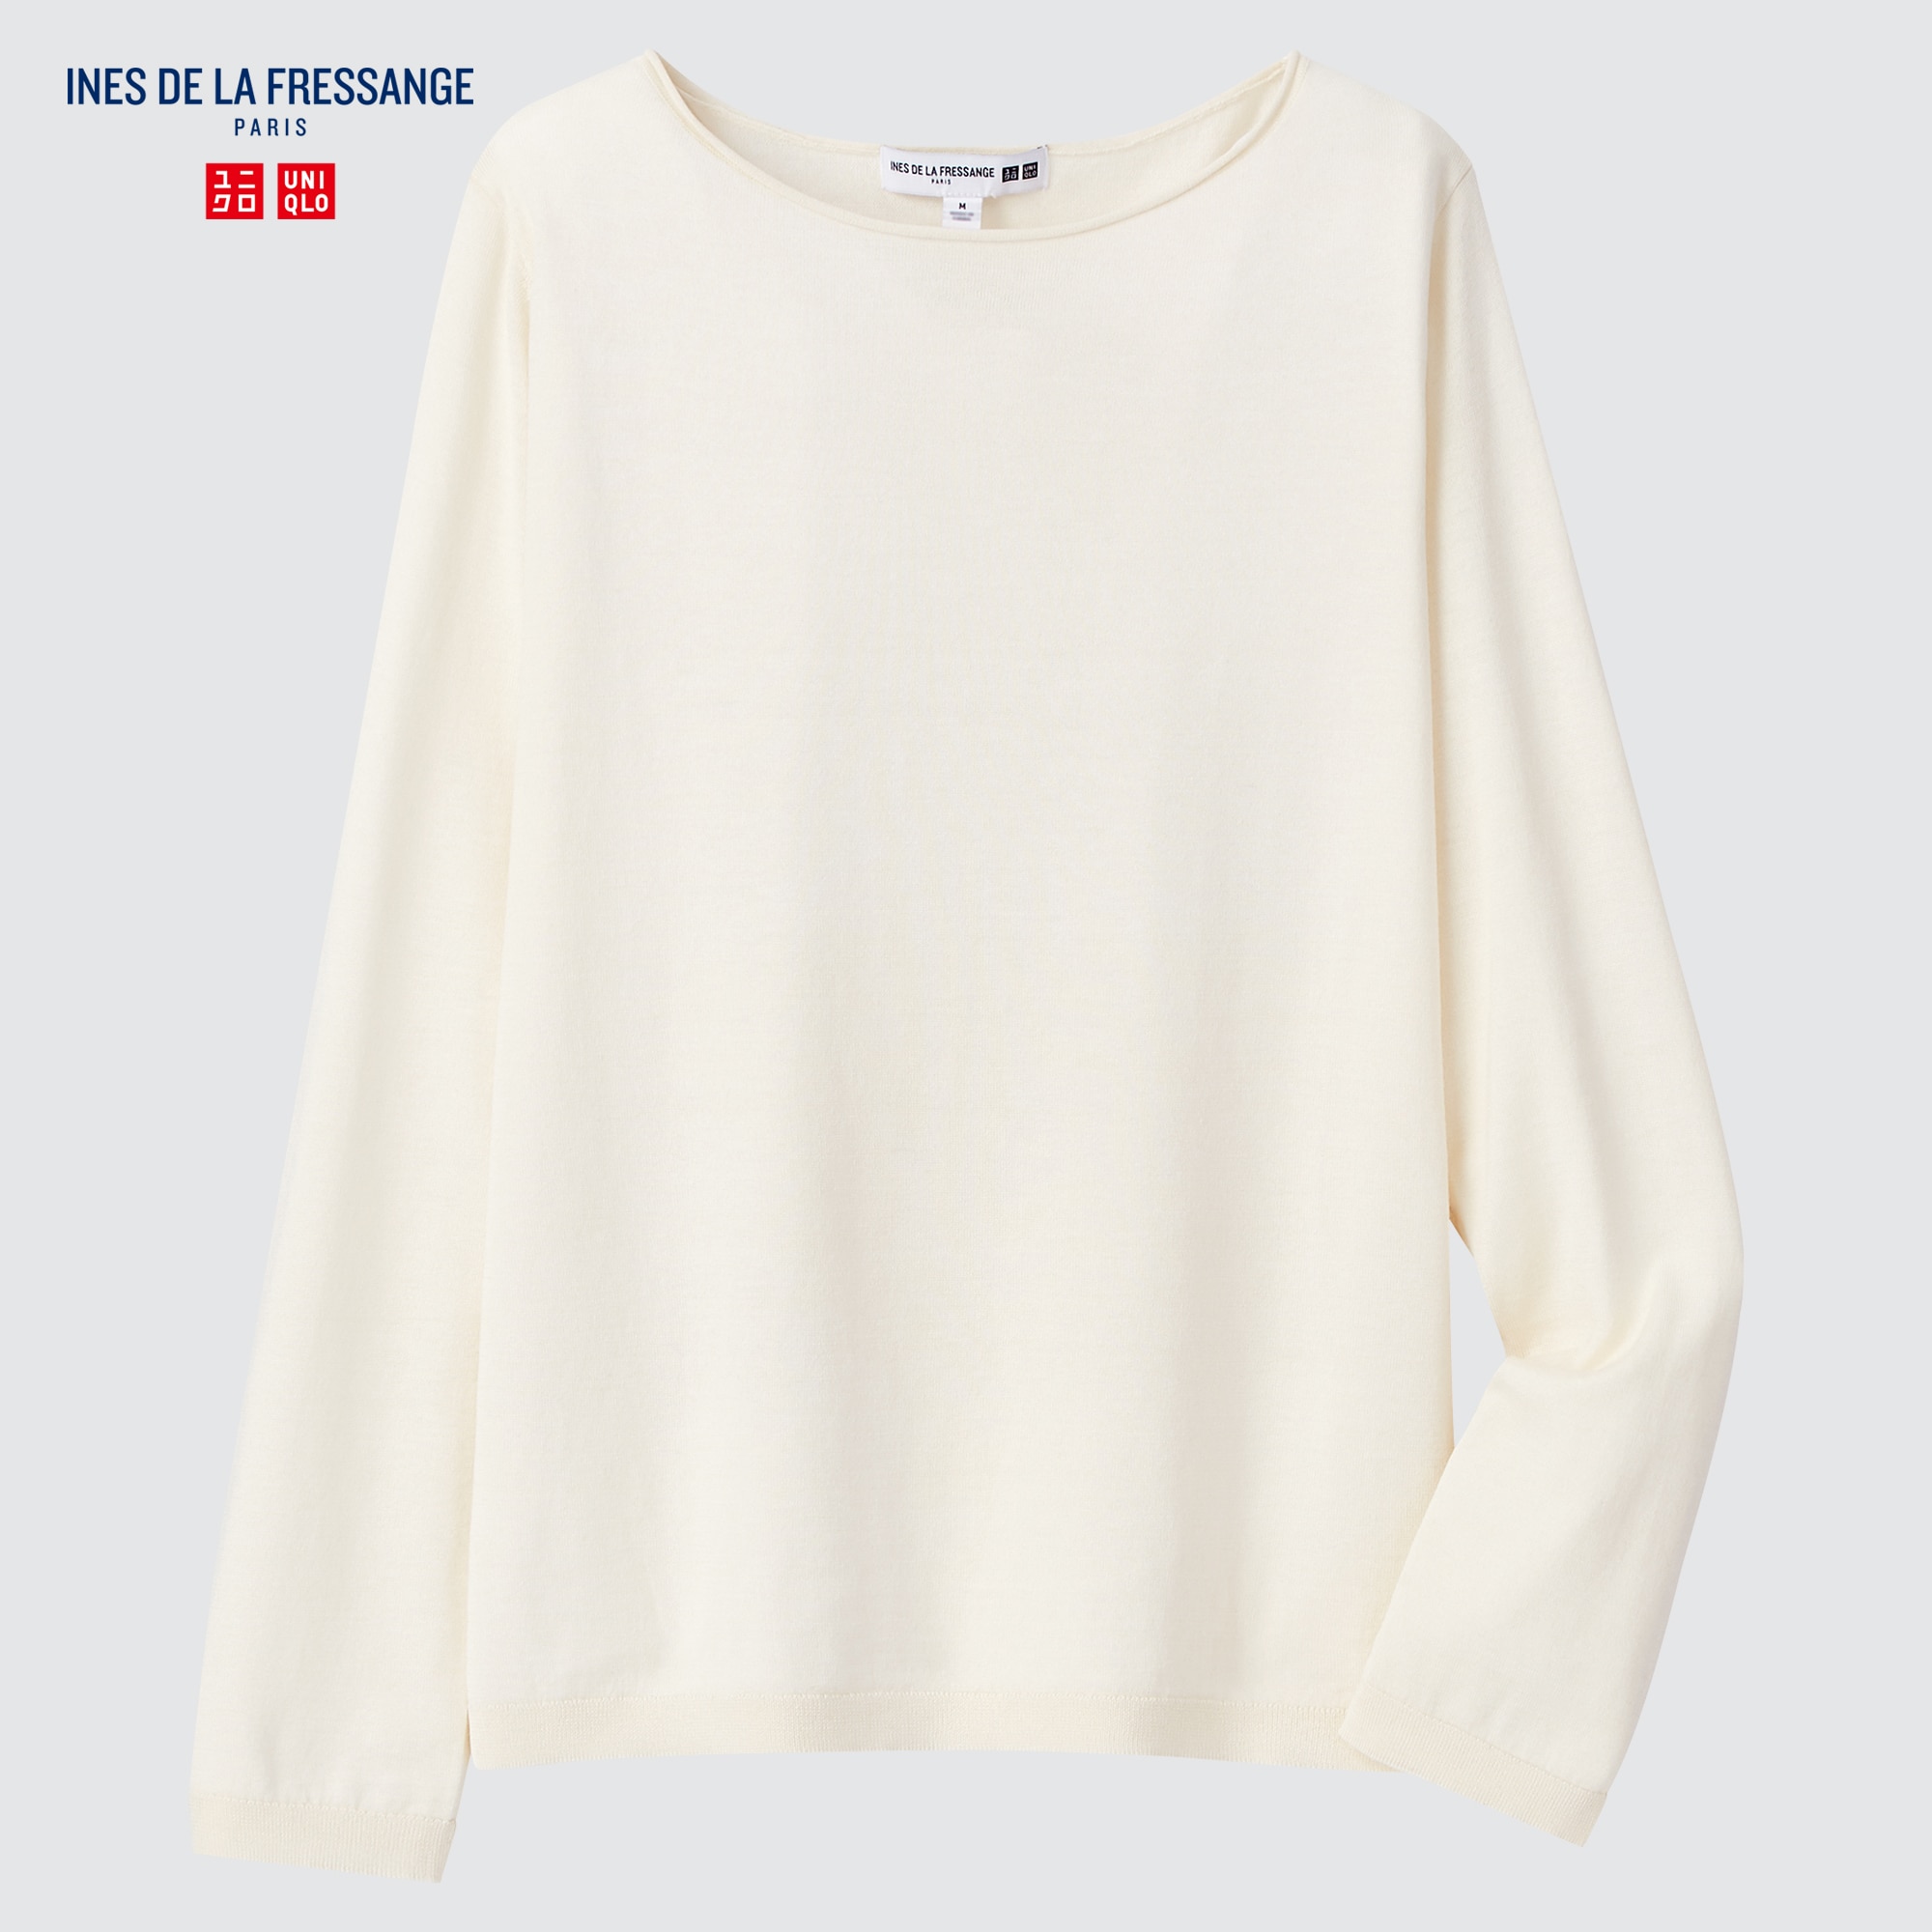 Uniqlo White Sweater Womens Fashion Tops Longsleeves on Carousell